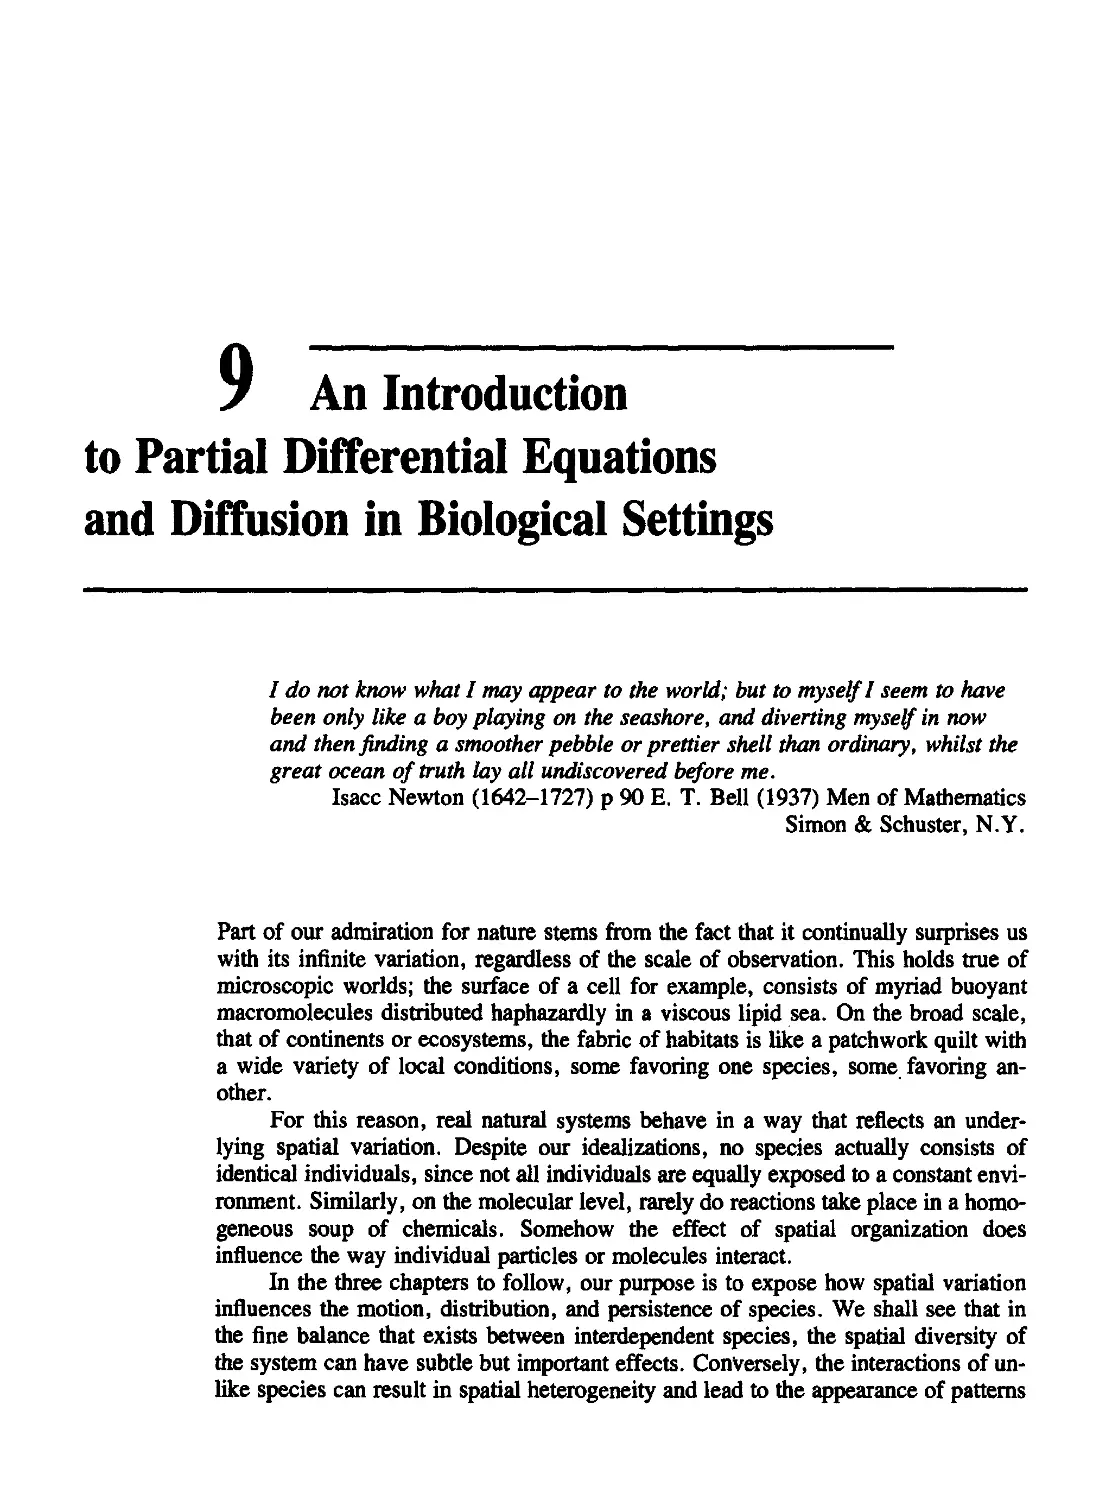 Chapter 9 An Introduction to Partial Differential Equations and Diffusion in Biological Settings